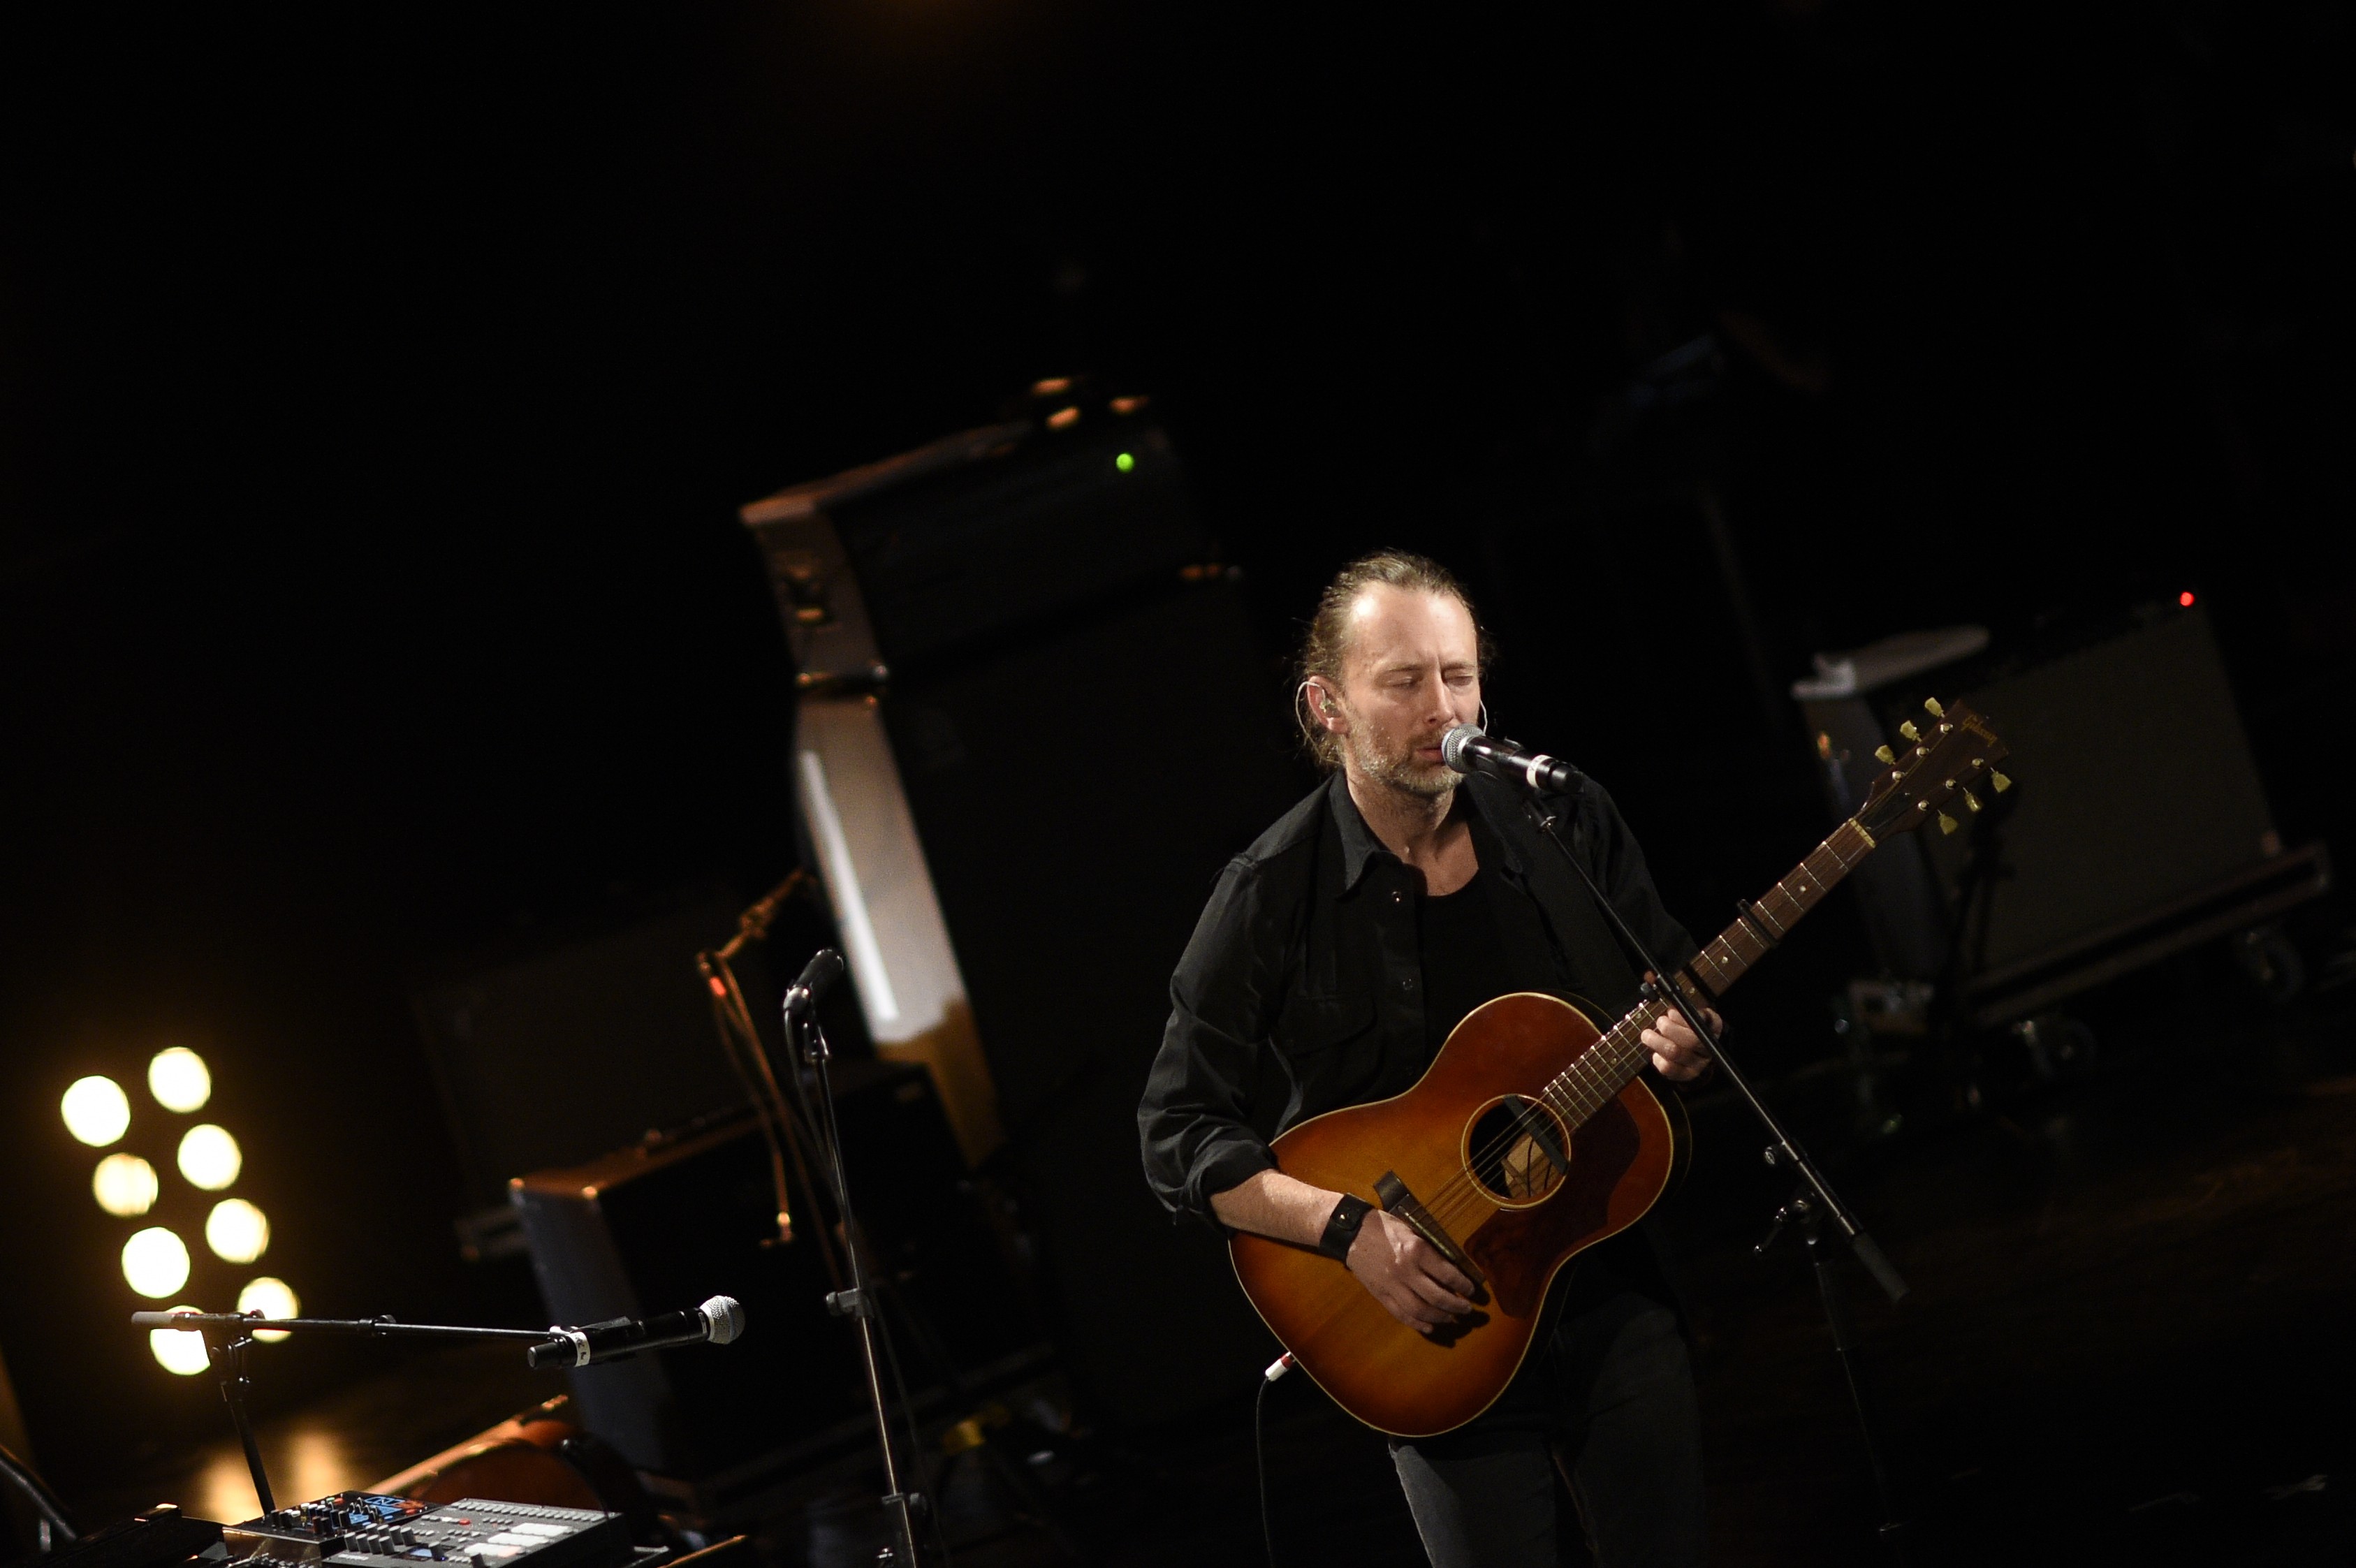 British singer and leader of Radiohead, Thom Yorke performs on the stage of the Trianon in Paris, on Dec. 4, 2015 (Martin Bureau—AFP/Getty Images)